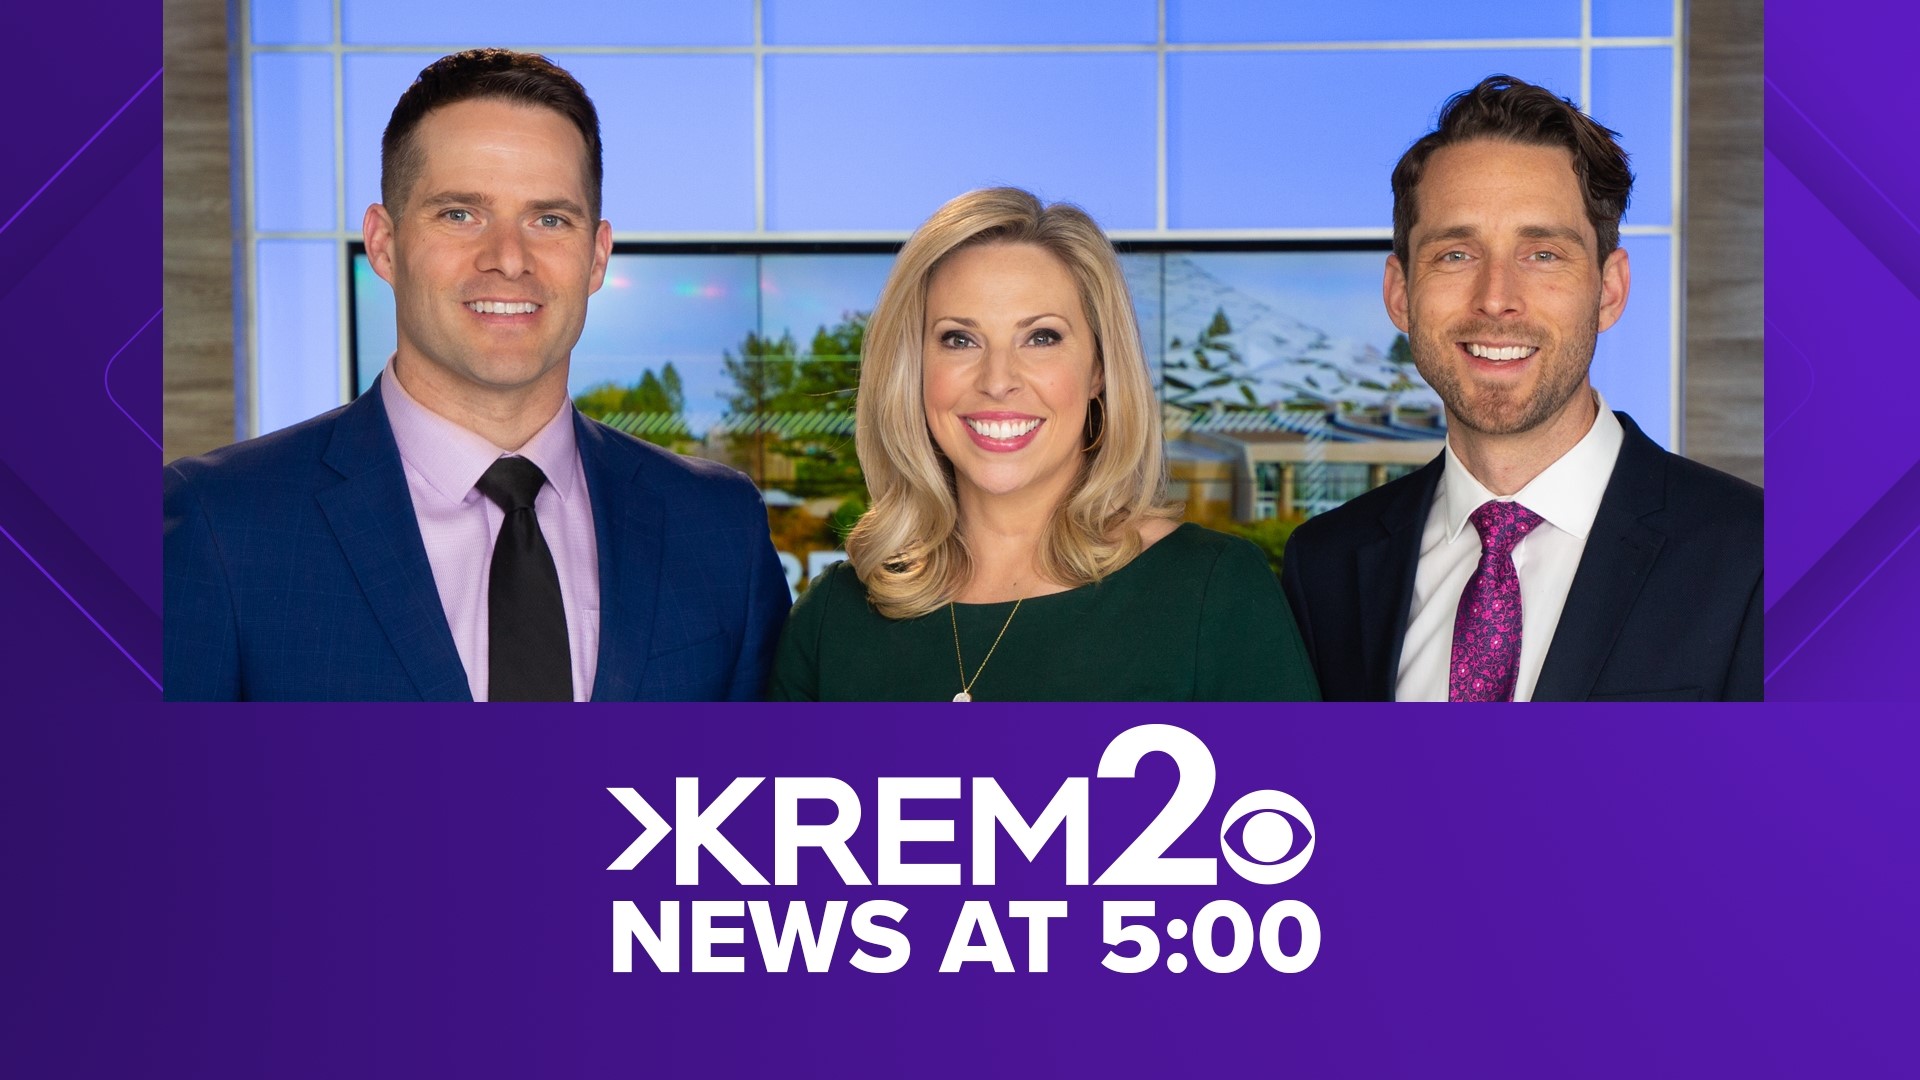 KREM 2 News provides the latest on major news impacting the Inland Northwest, plus weather and sports.